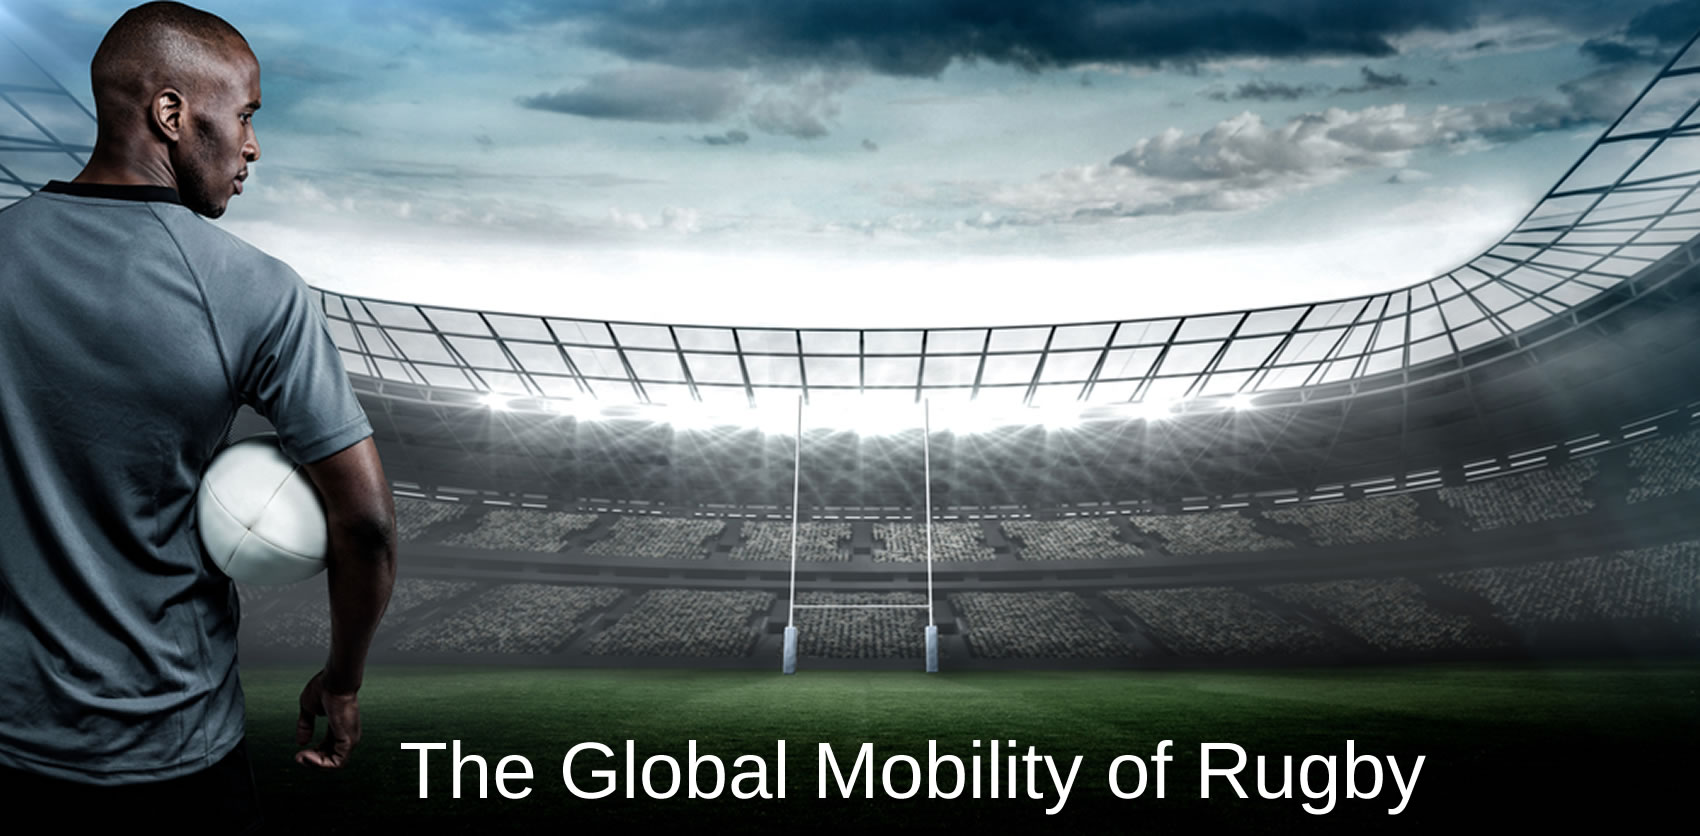 The global mobility effect of rugby - image source: Shutterstock, Inc. Credit/copyright: wavebreakmedia